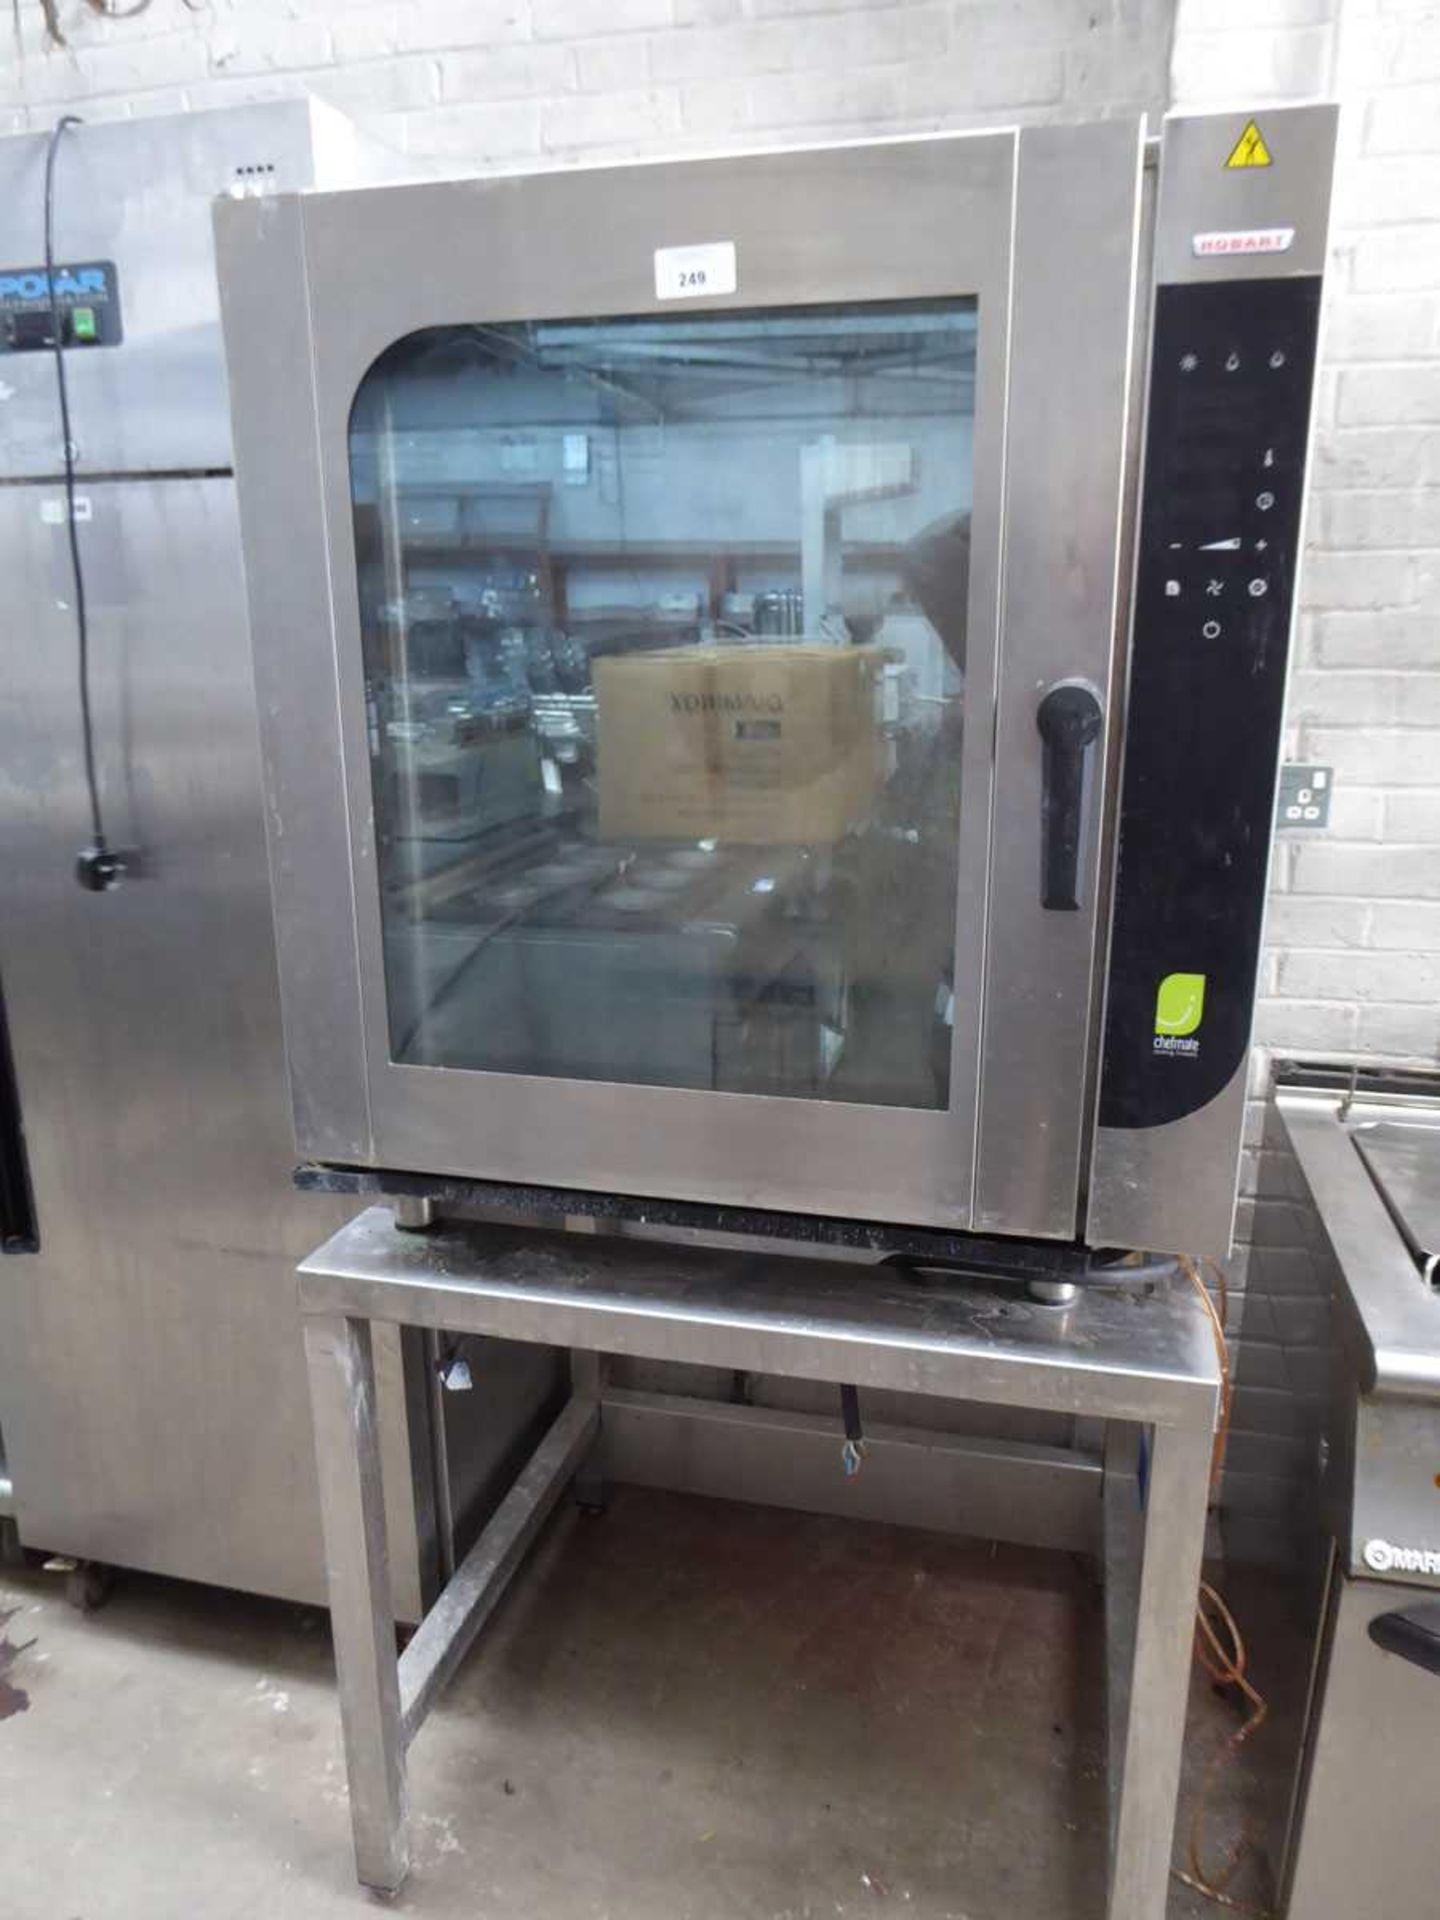 +VAT 90cm electric Hobart model CME10 10 grid combination oven on stand We are unsure of the history